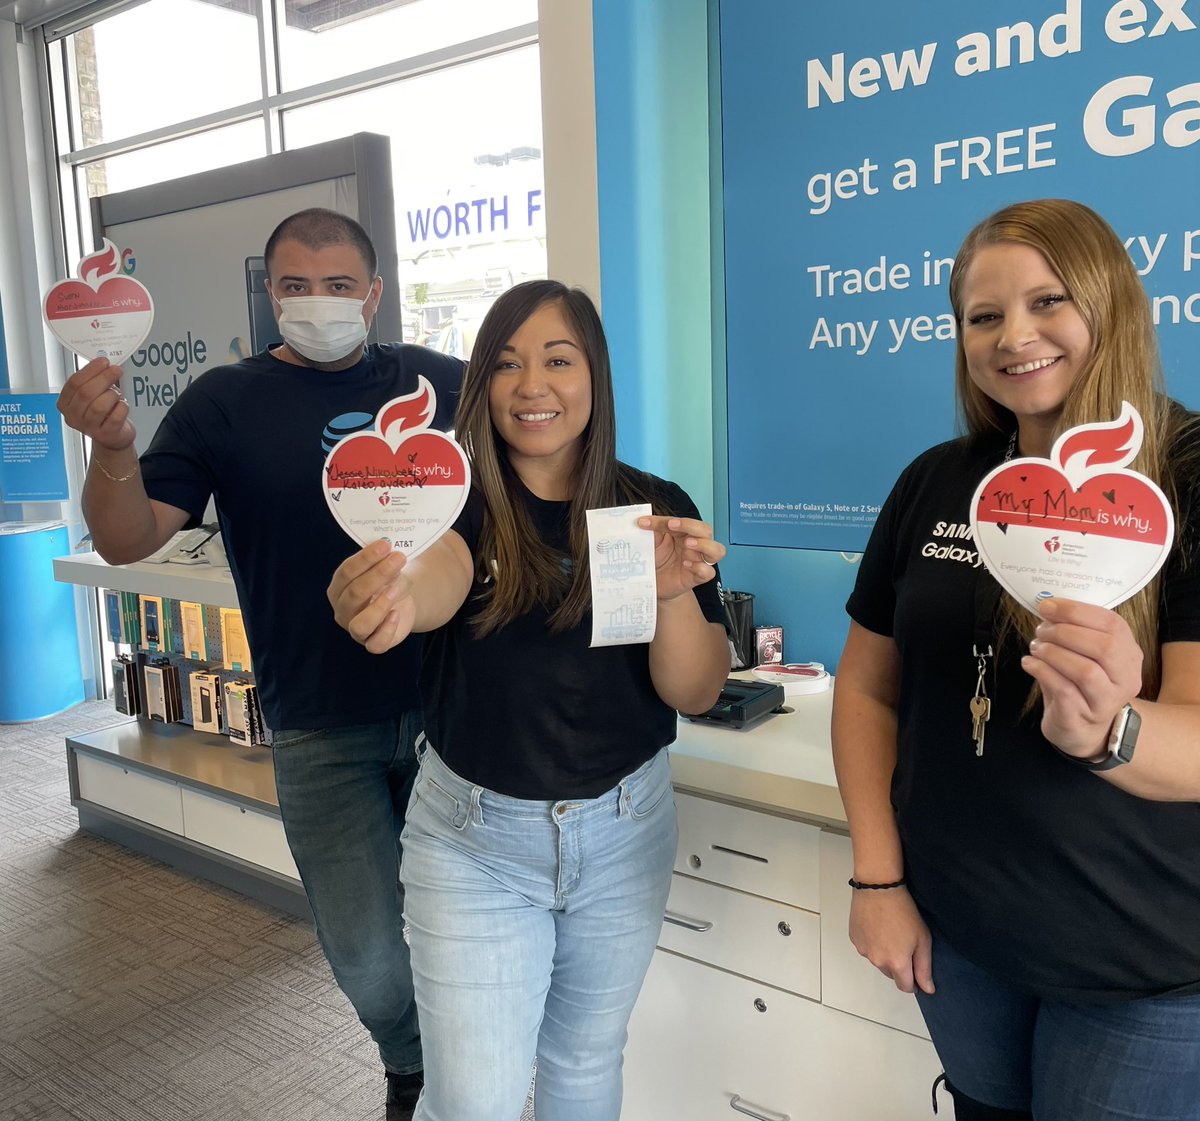 American Heart Association spirit week ❤️ Together let’s make a difference. We donated and now we’re calling out @NTX_RobbieB @Julian_NTX @grywatch @NTX_Hendo @Mike_P_ATT @SarahOhagan10 #TeamIzzy #NTXHasHeart #WhosYourWhy @israelmedinajr @dbustamante1210